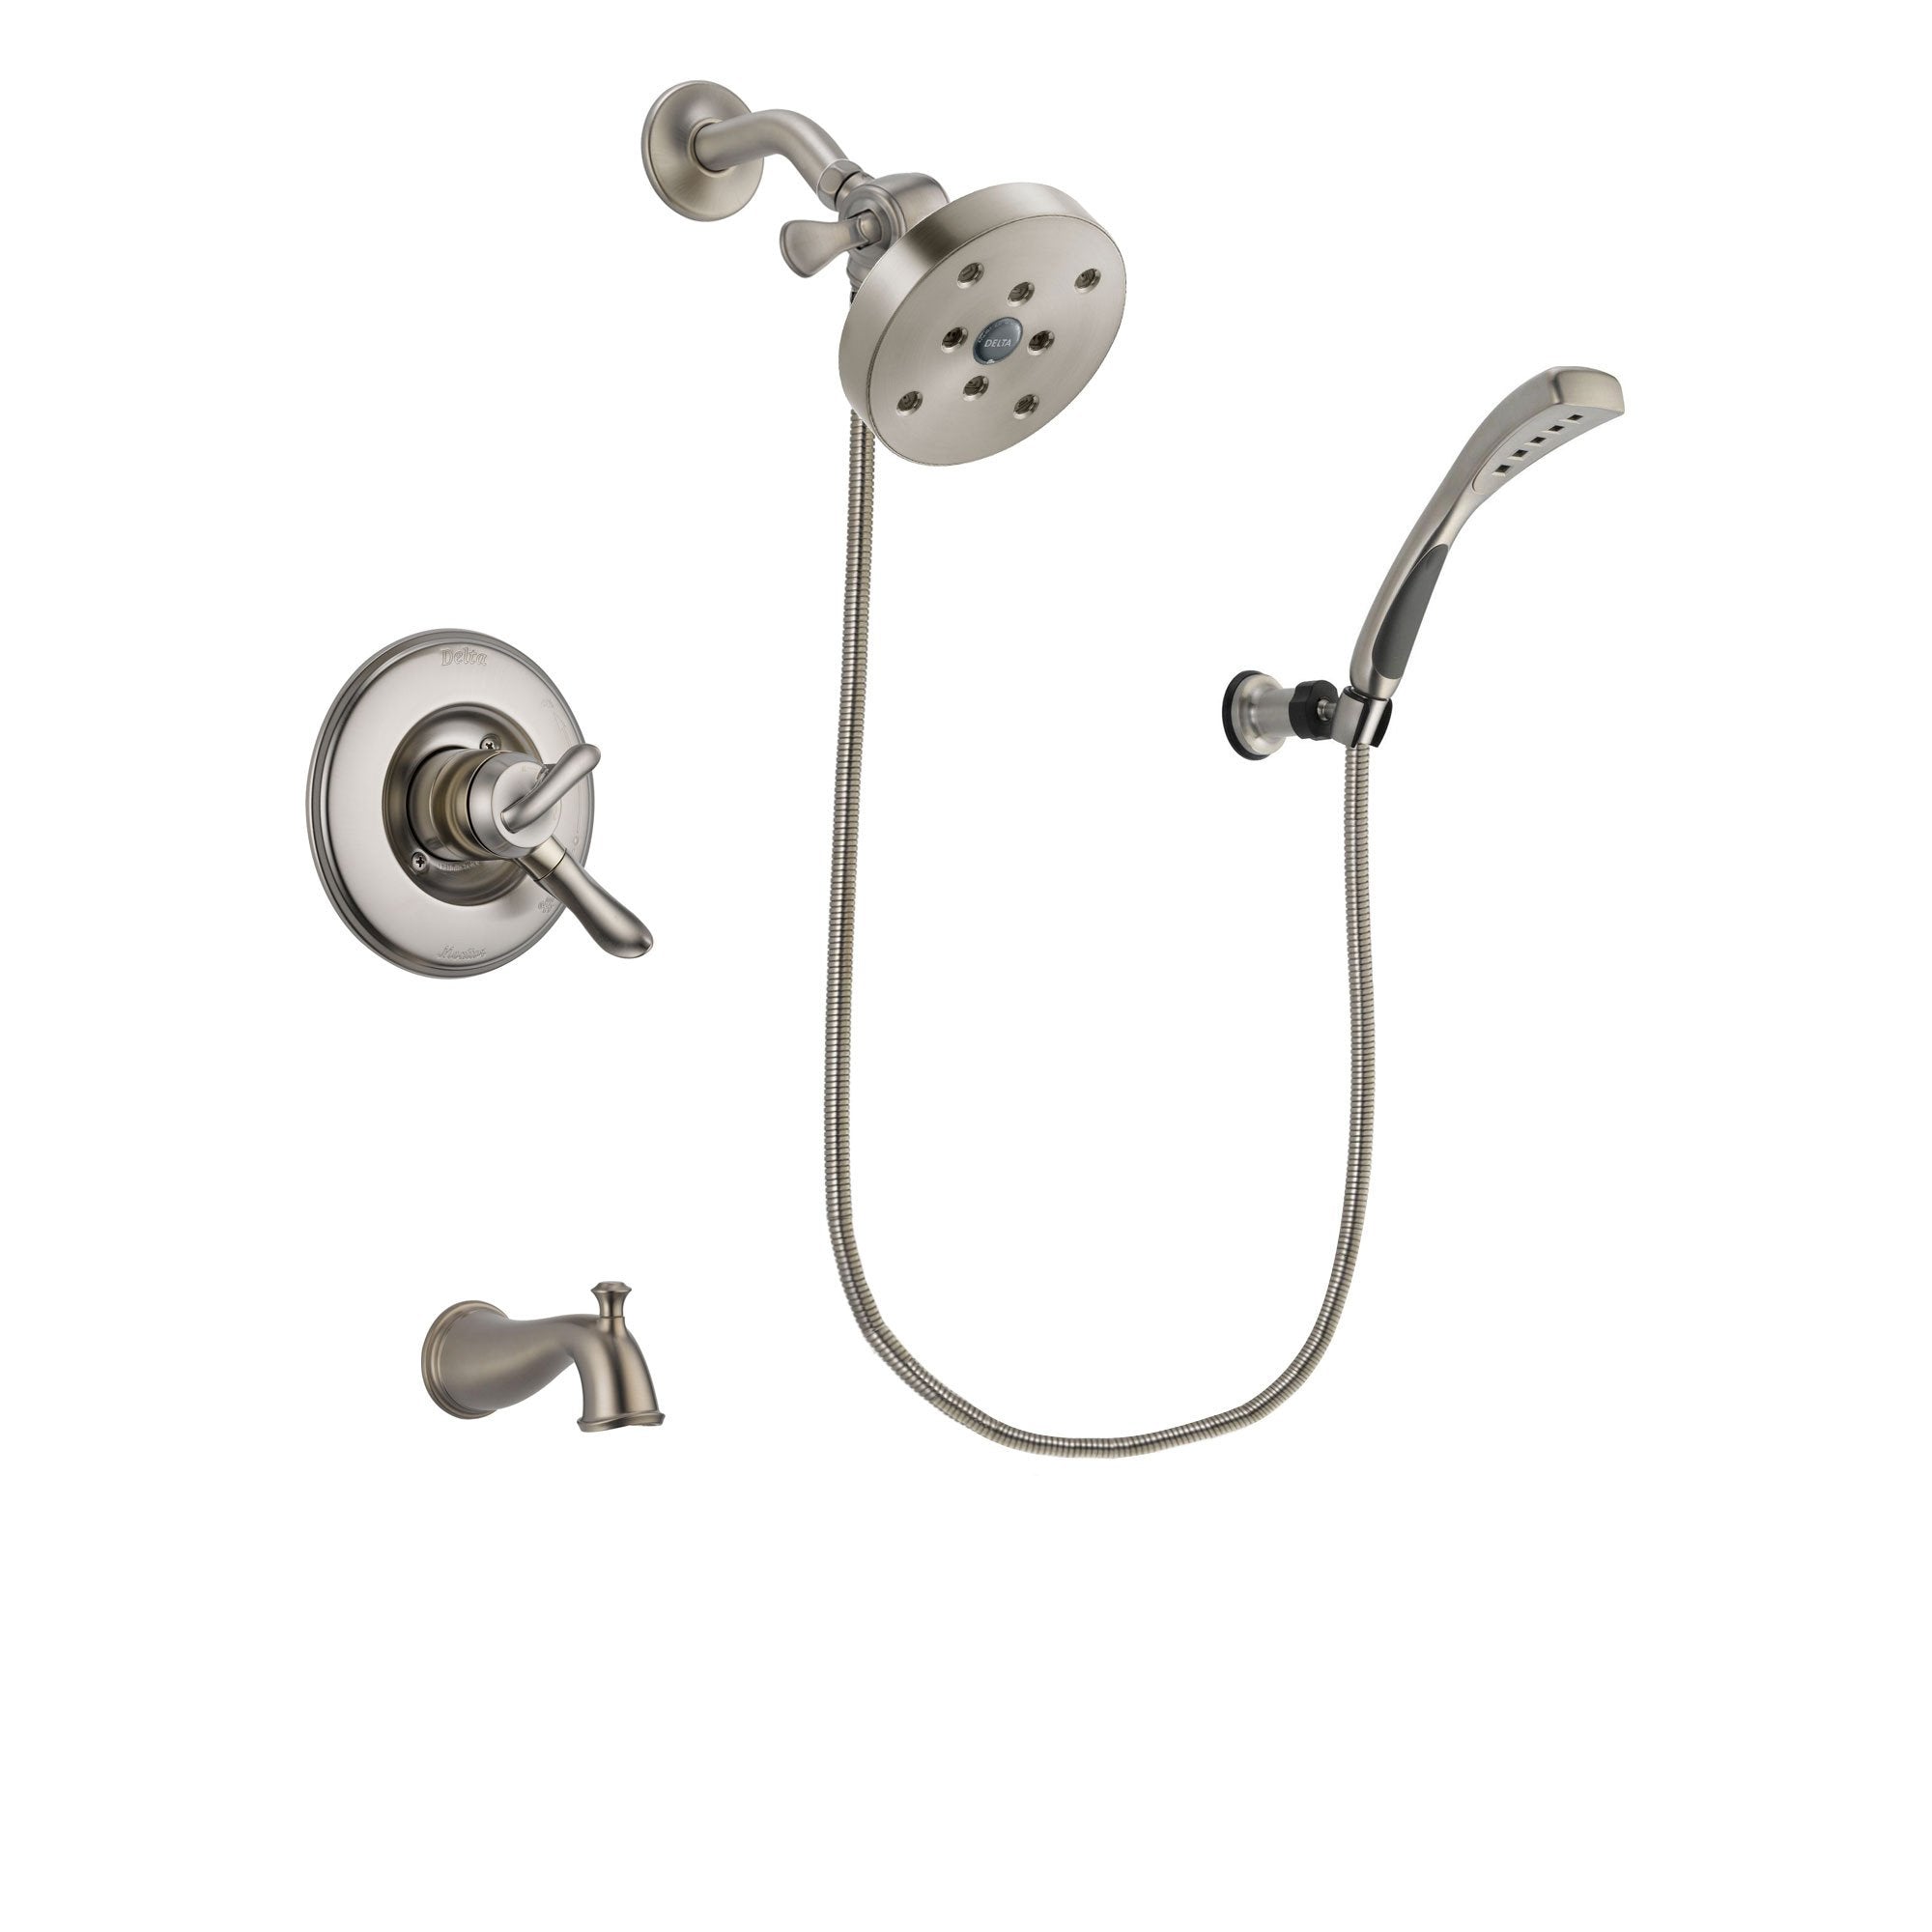 Delta Linden Stainless Steel Finish Dual Control Tub and Shower Faucet System Package with 5-1/2 inch Shower Head and Wall Mounted Handshower Includes Rough-in Valve and Tub Spout DSP1917V